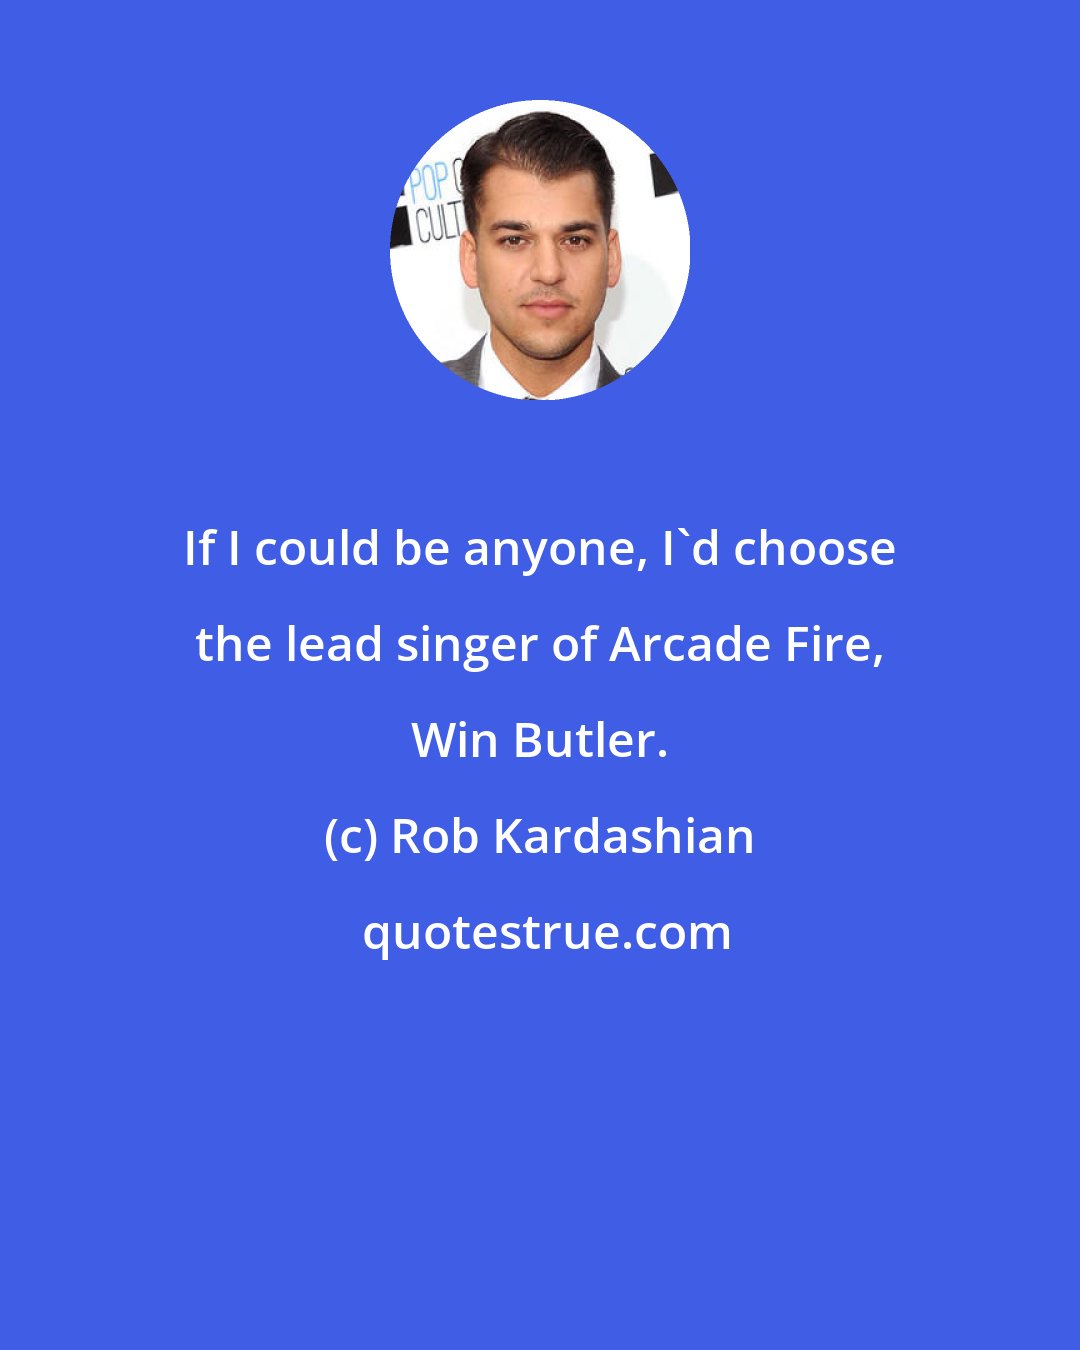 Rob Kardashian: If I could be anyone, I'd choose the lead singer of Arcade Fire, Win Butler.